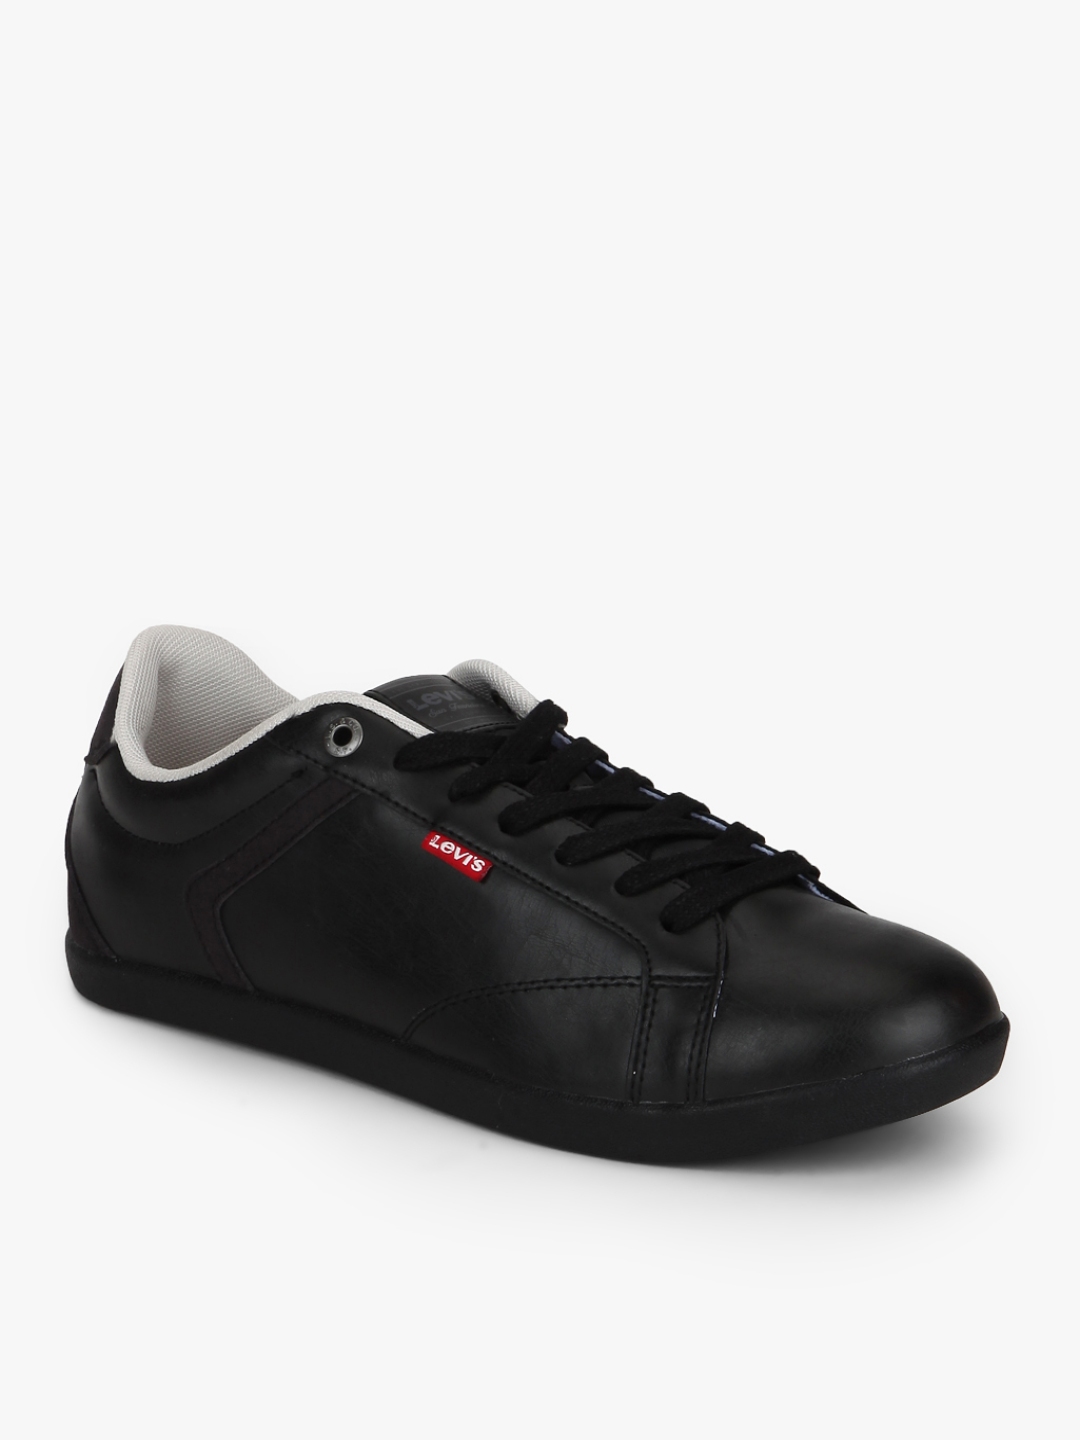 Buy Woods Classic Black Sneakers - Casual Shoes for Men 7442031 | Myntra